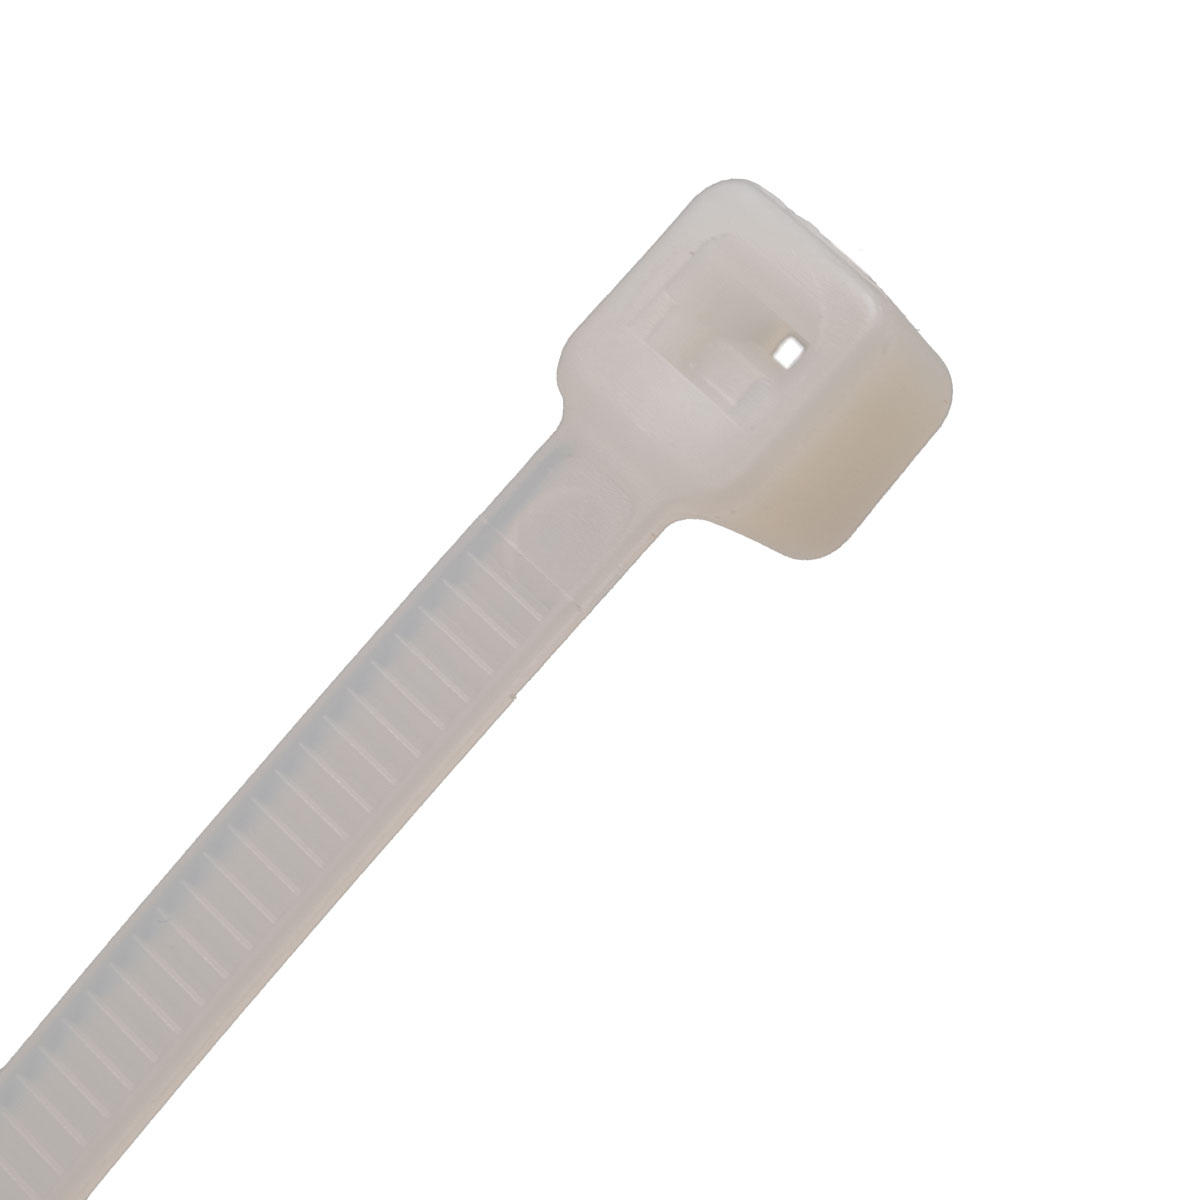 3.6x200mm Natural, Nylon 66 cable tie